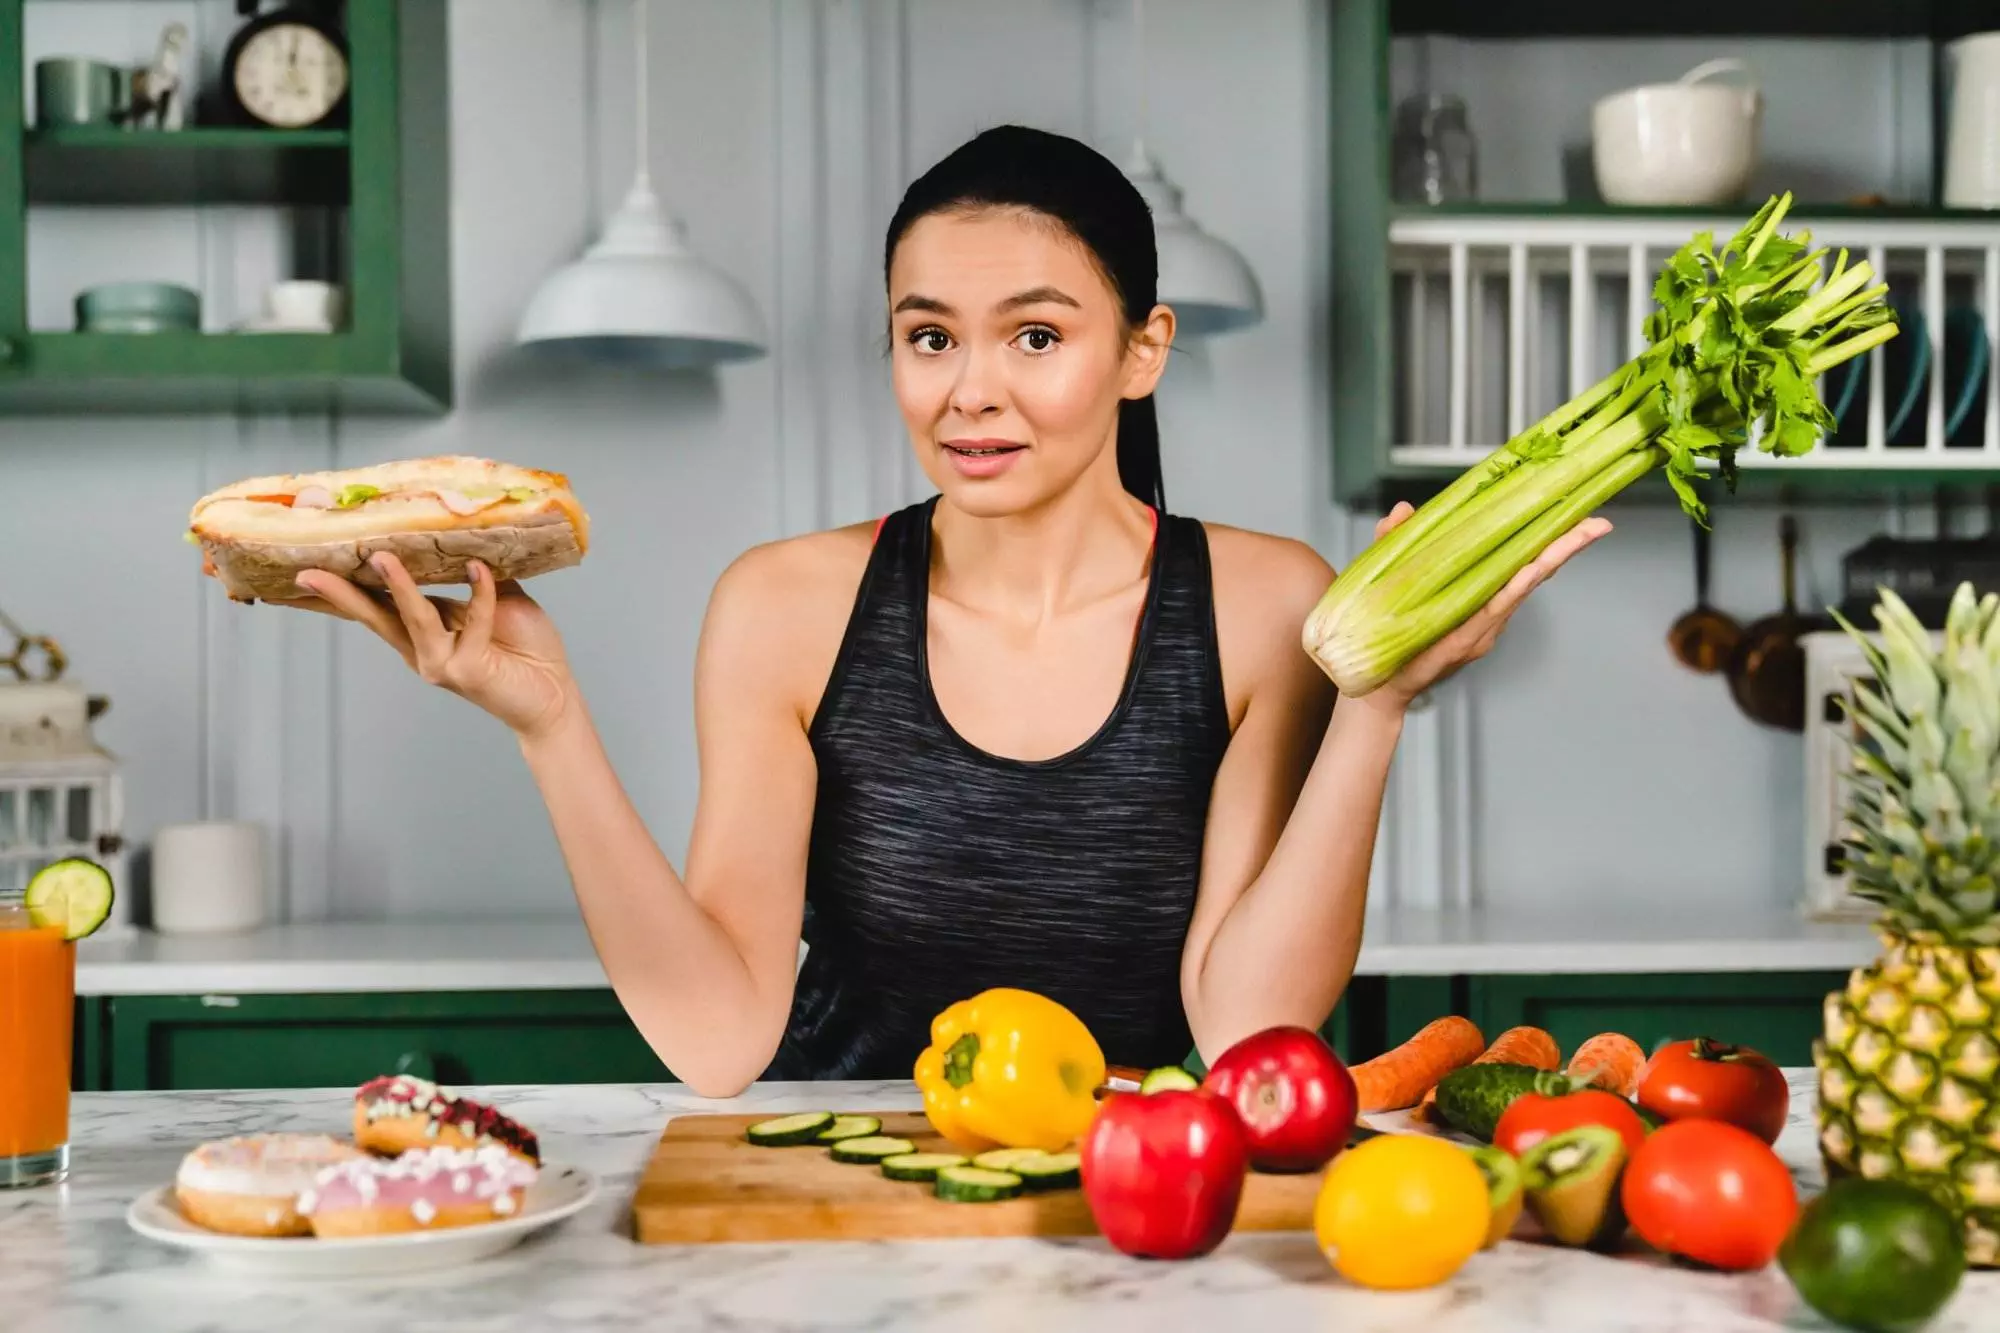 Woman choosing between sandwich and celery, healthy eating concept.